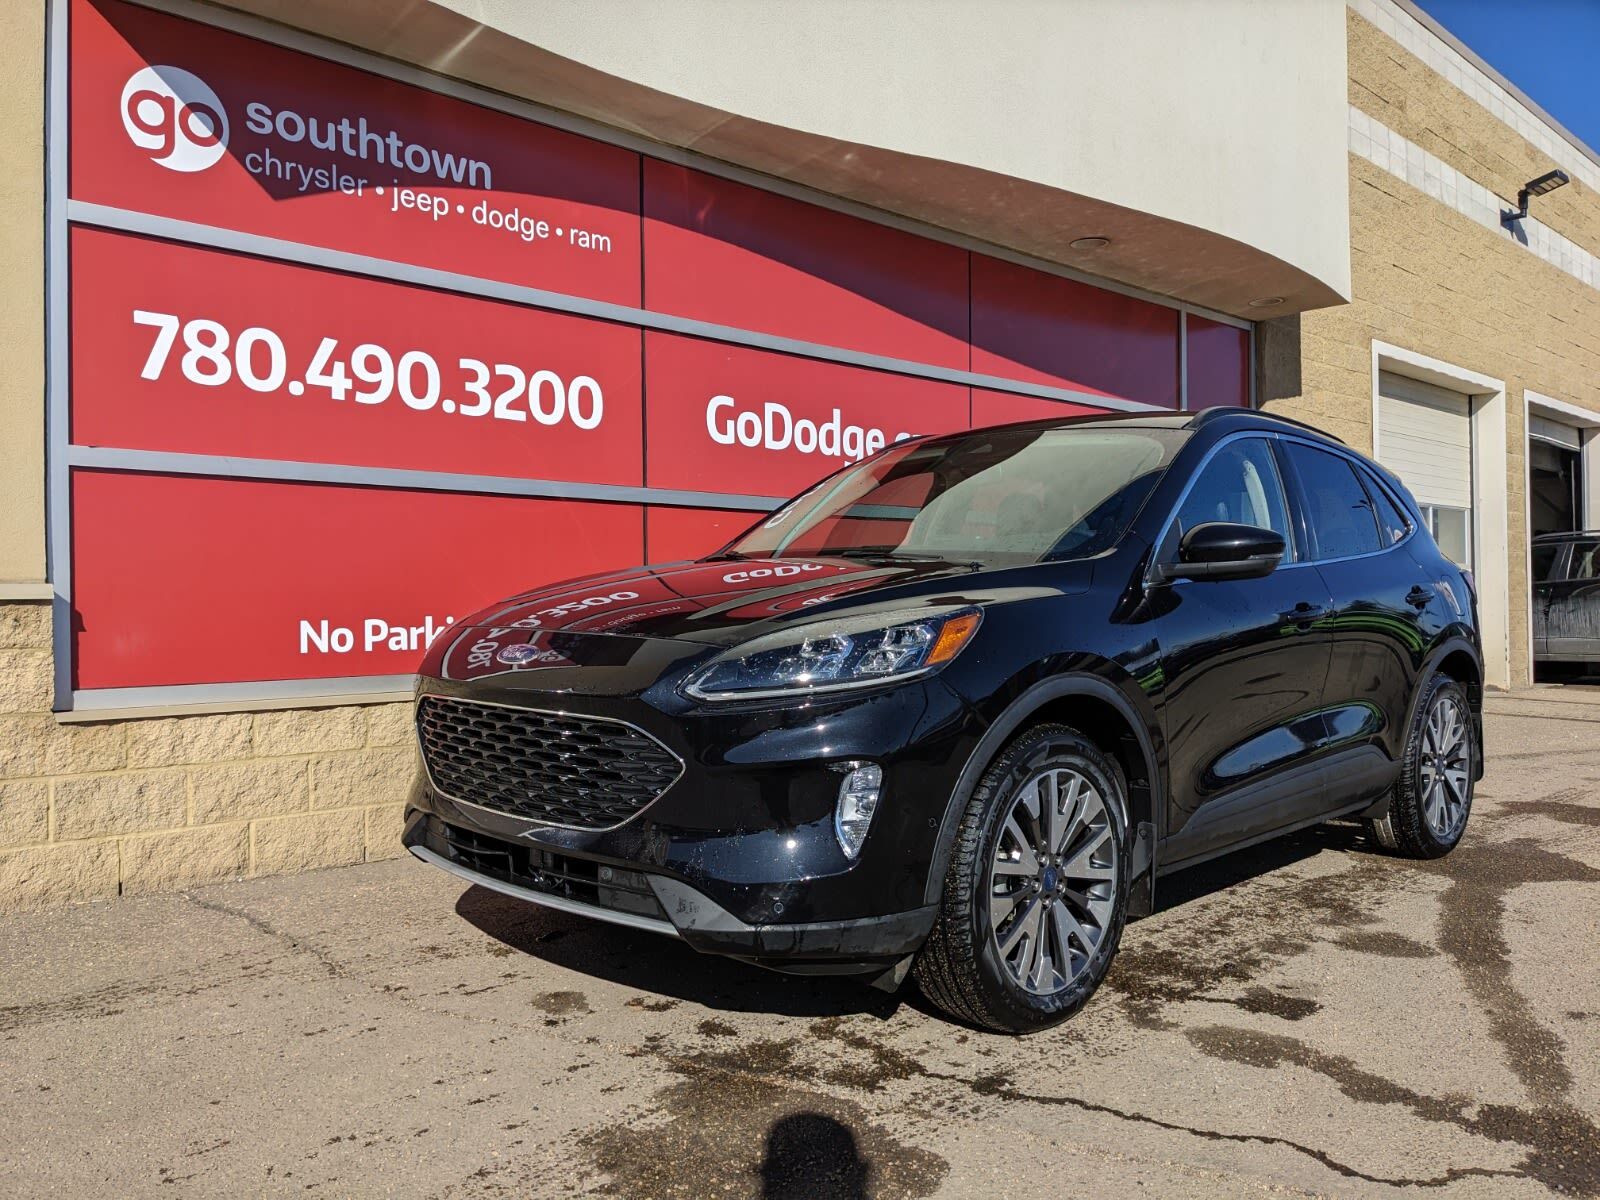 2020 Ford Escape TITANIUM HYBRID IN BLACK METALLIC EQUIPPED WITH A 